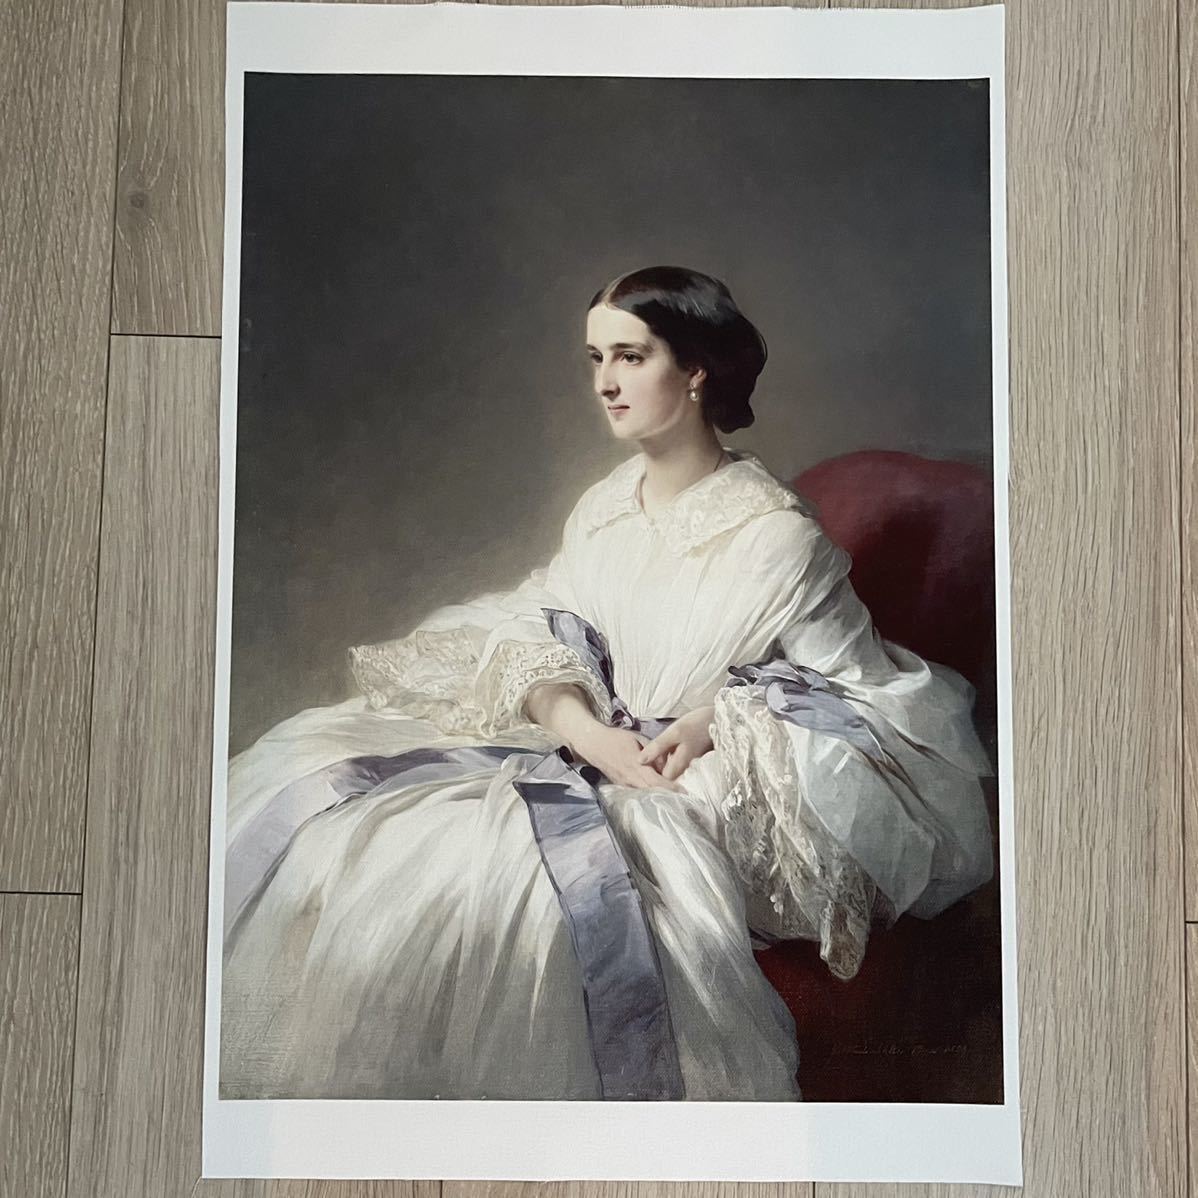 [Free Shipping] Countess Olga by Franz Winterhalter, canvas print, 307 x 413 cm, Western painting, Russian painting, portrait, Artwork, Painting, others